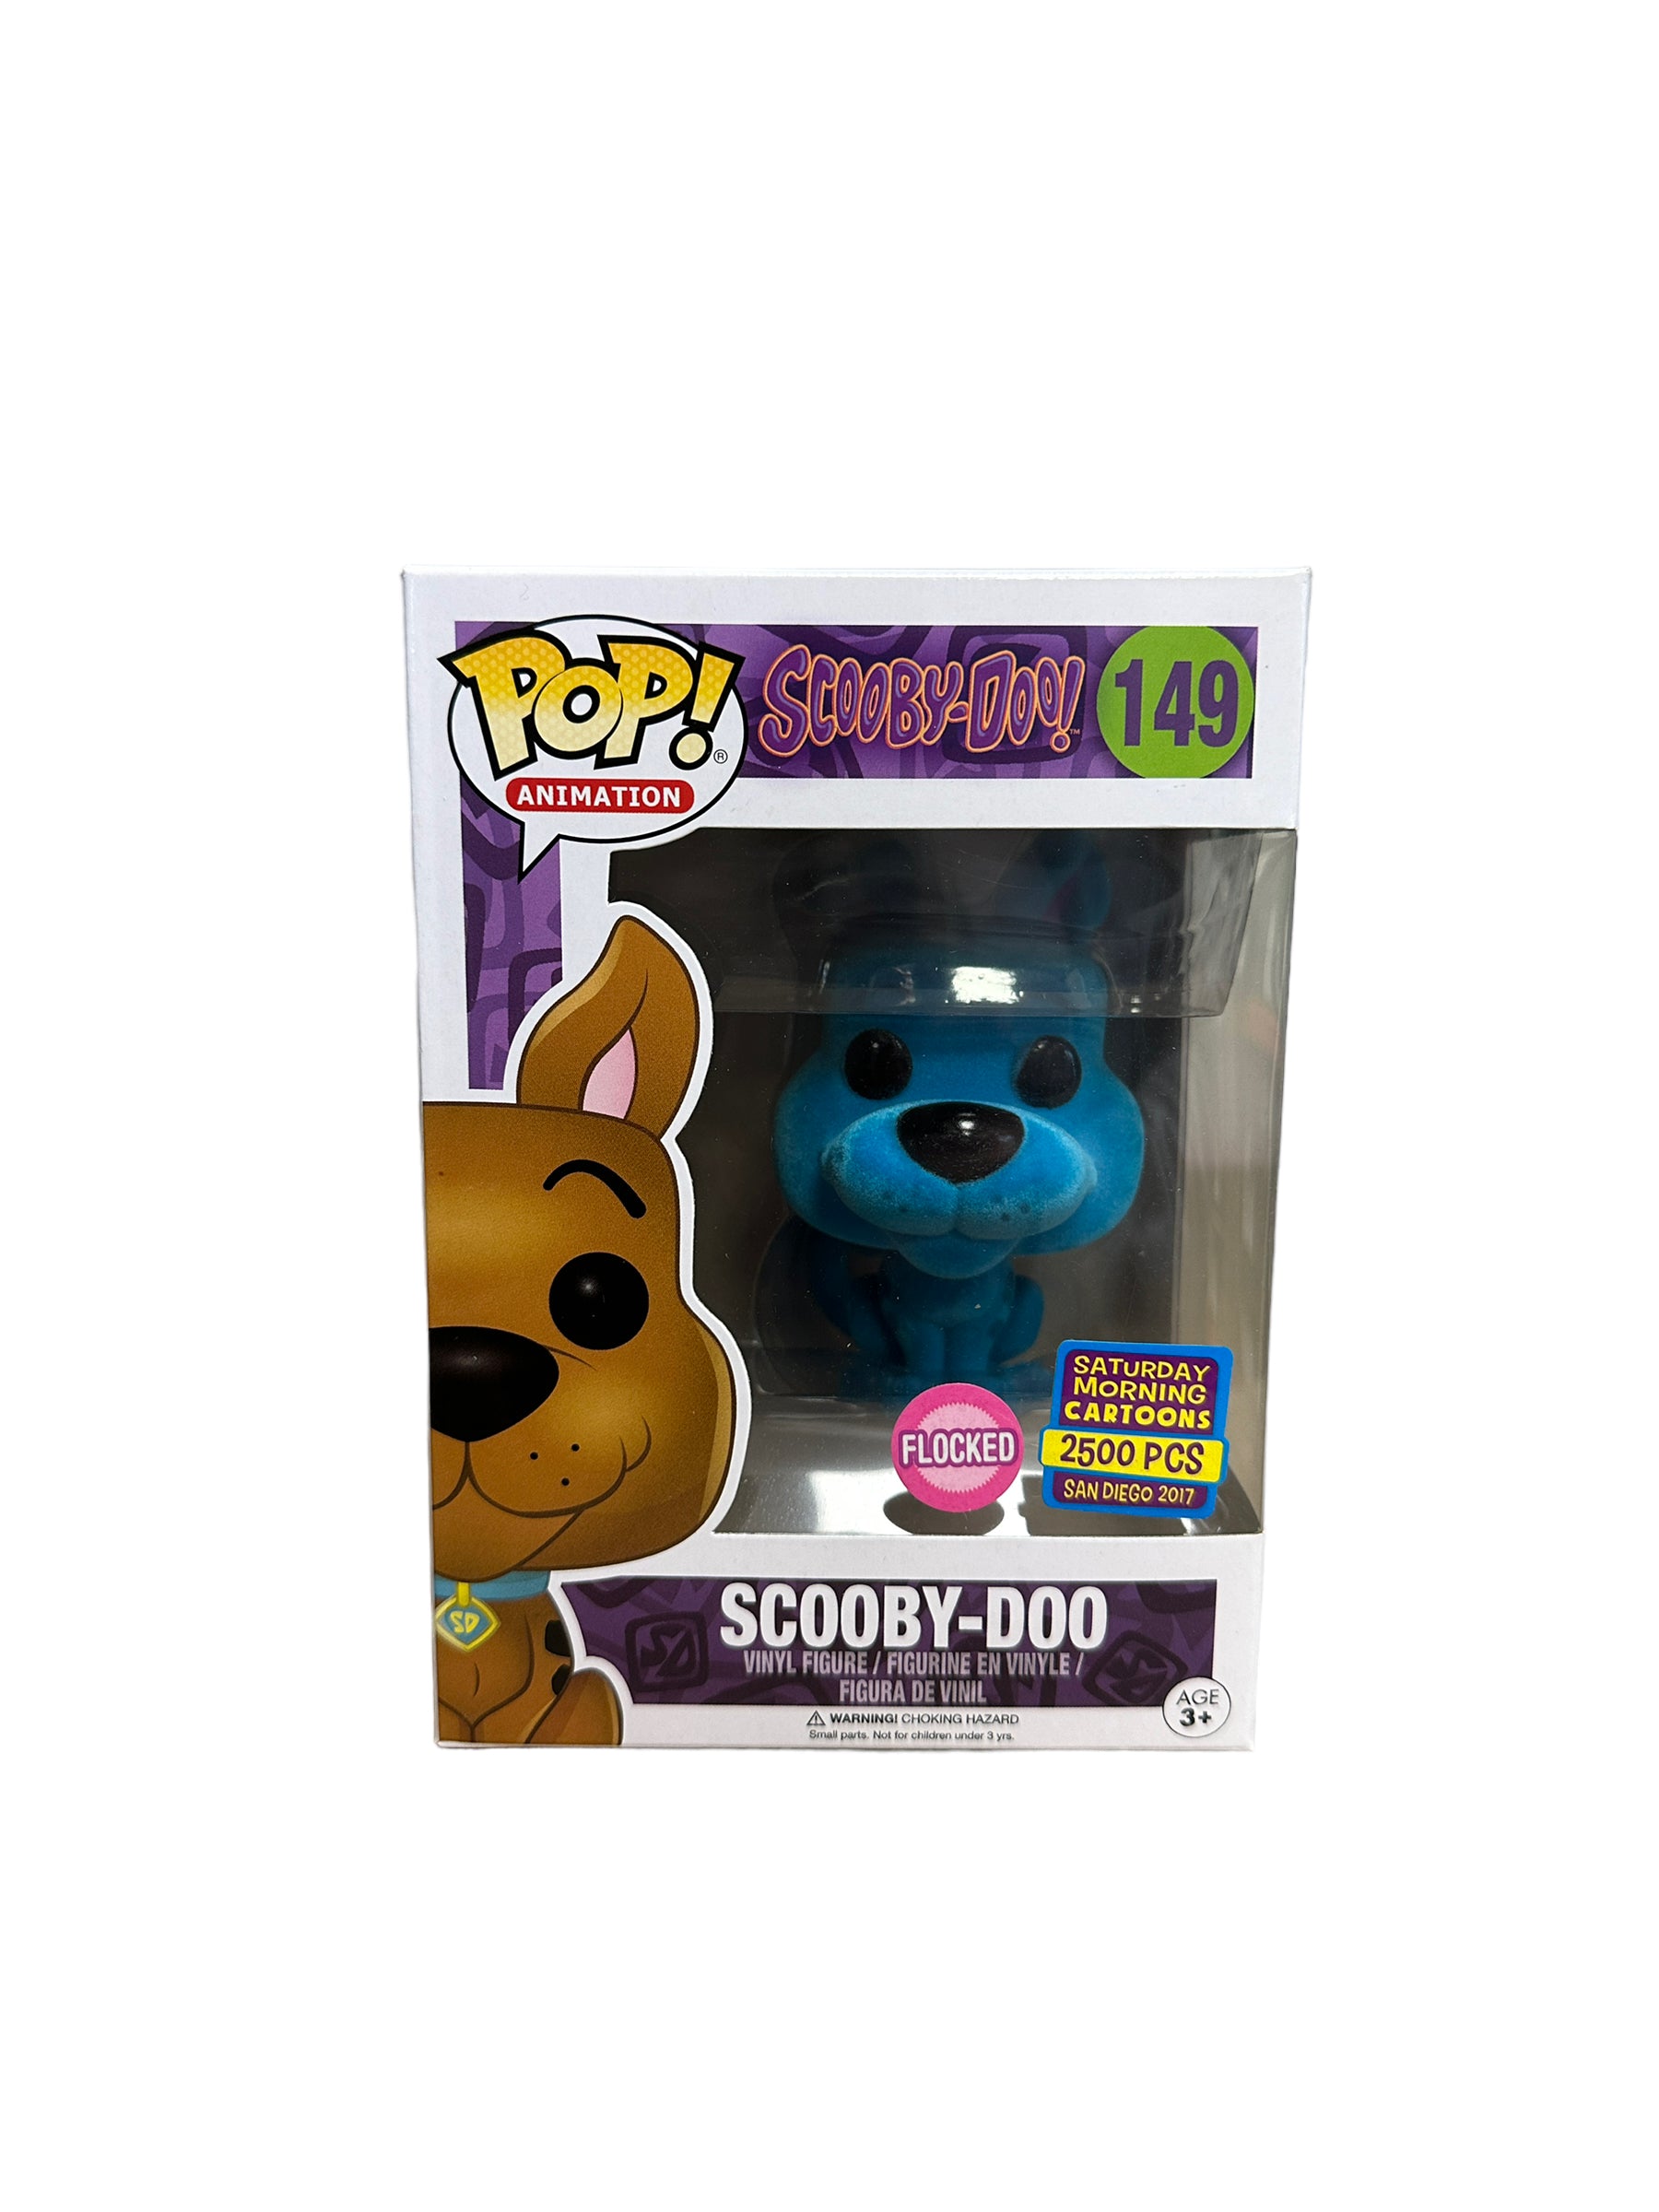 Scooby-Doo #149 (Blue Flocked) Funko Pop! - Scooby-Doo! - SDCC 2017 Saturday Morning Cartoons Exclusive LE2500 Pcs - Condition 9/10